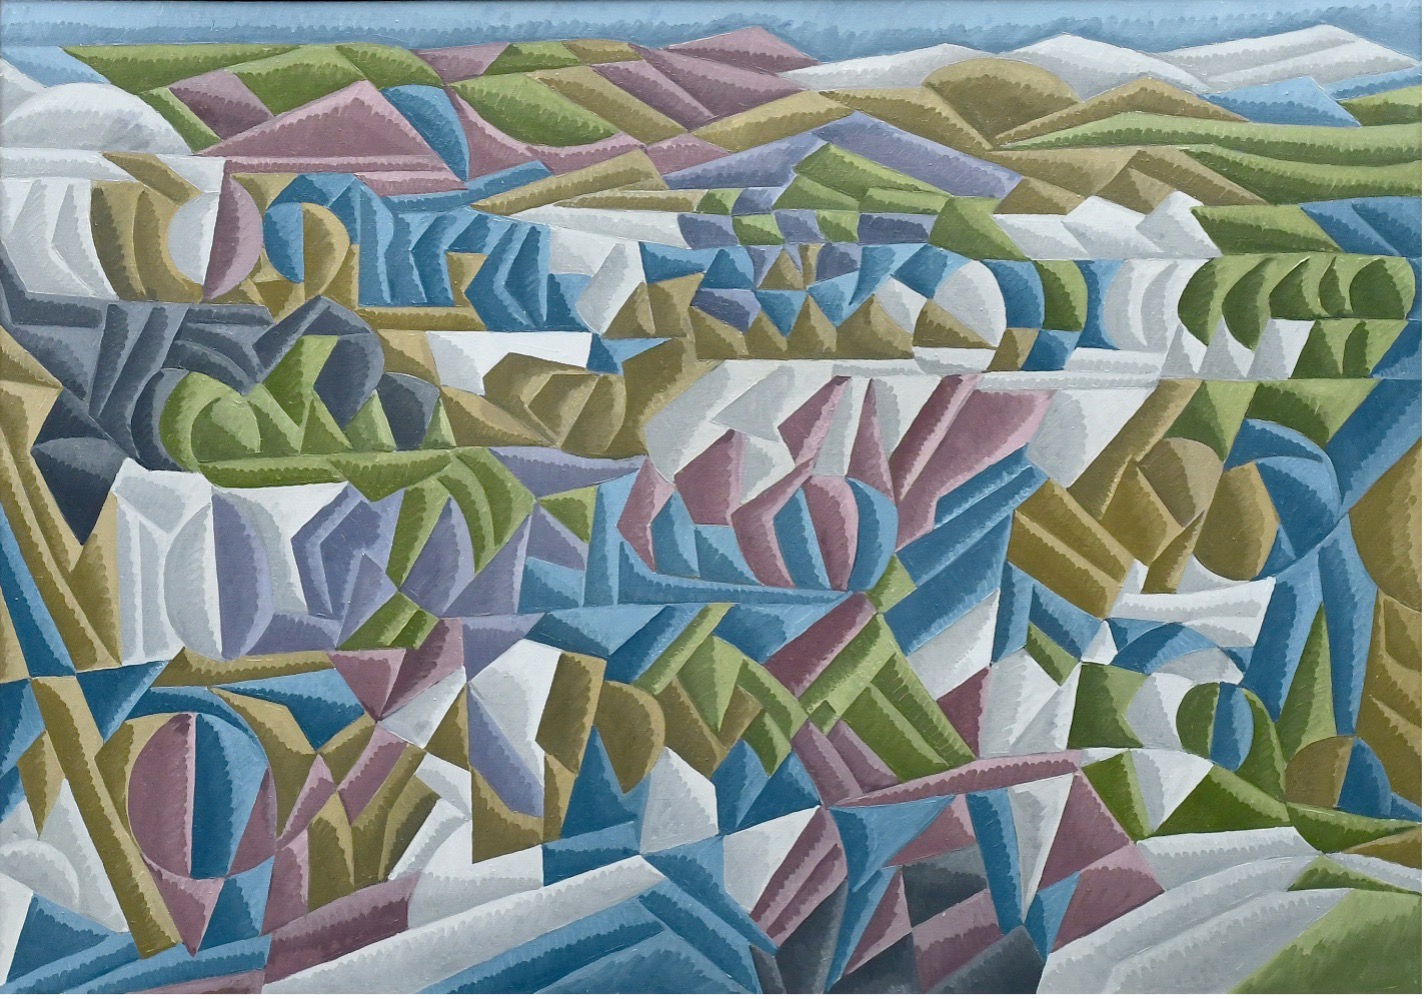 An abstracted painting consisting of small cross-hatched blue, purple, olive green and white cross-hatched sections that form an undulating landscape vista.